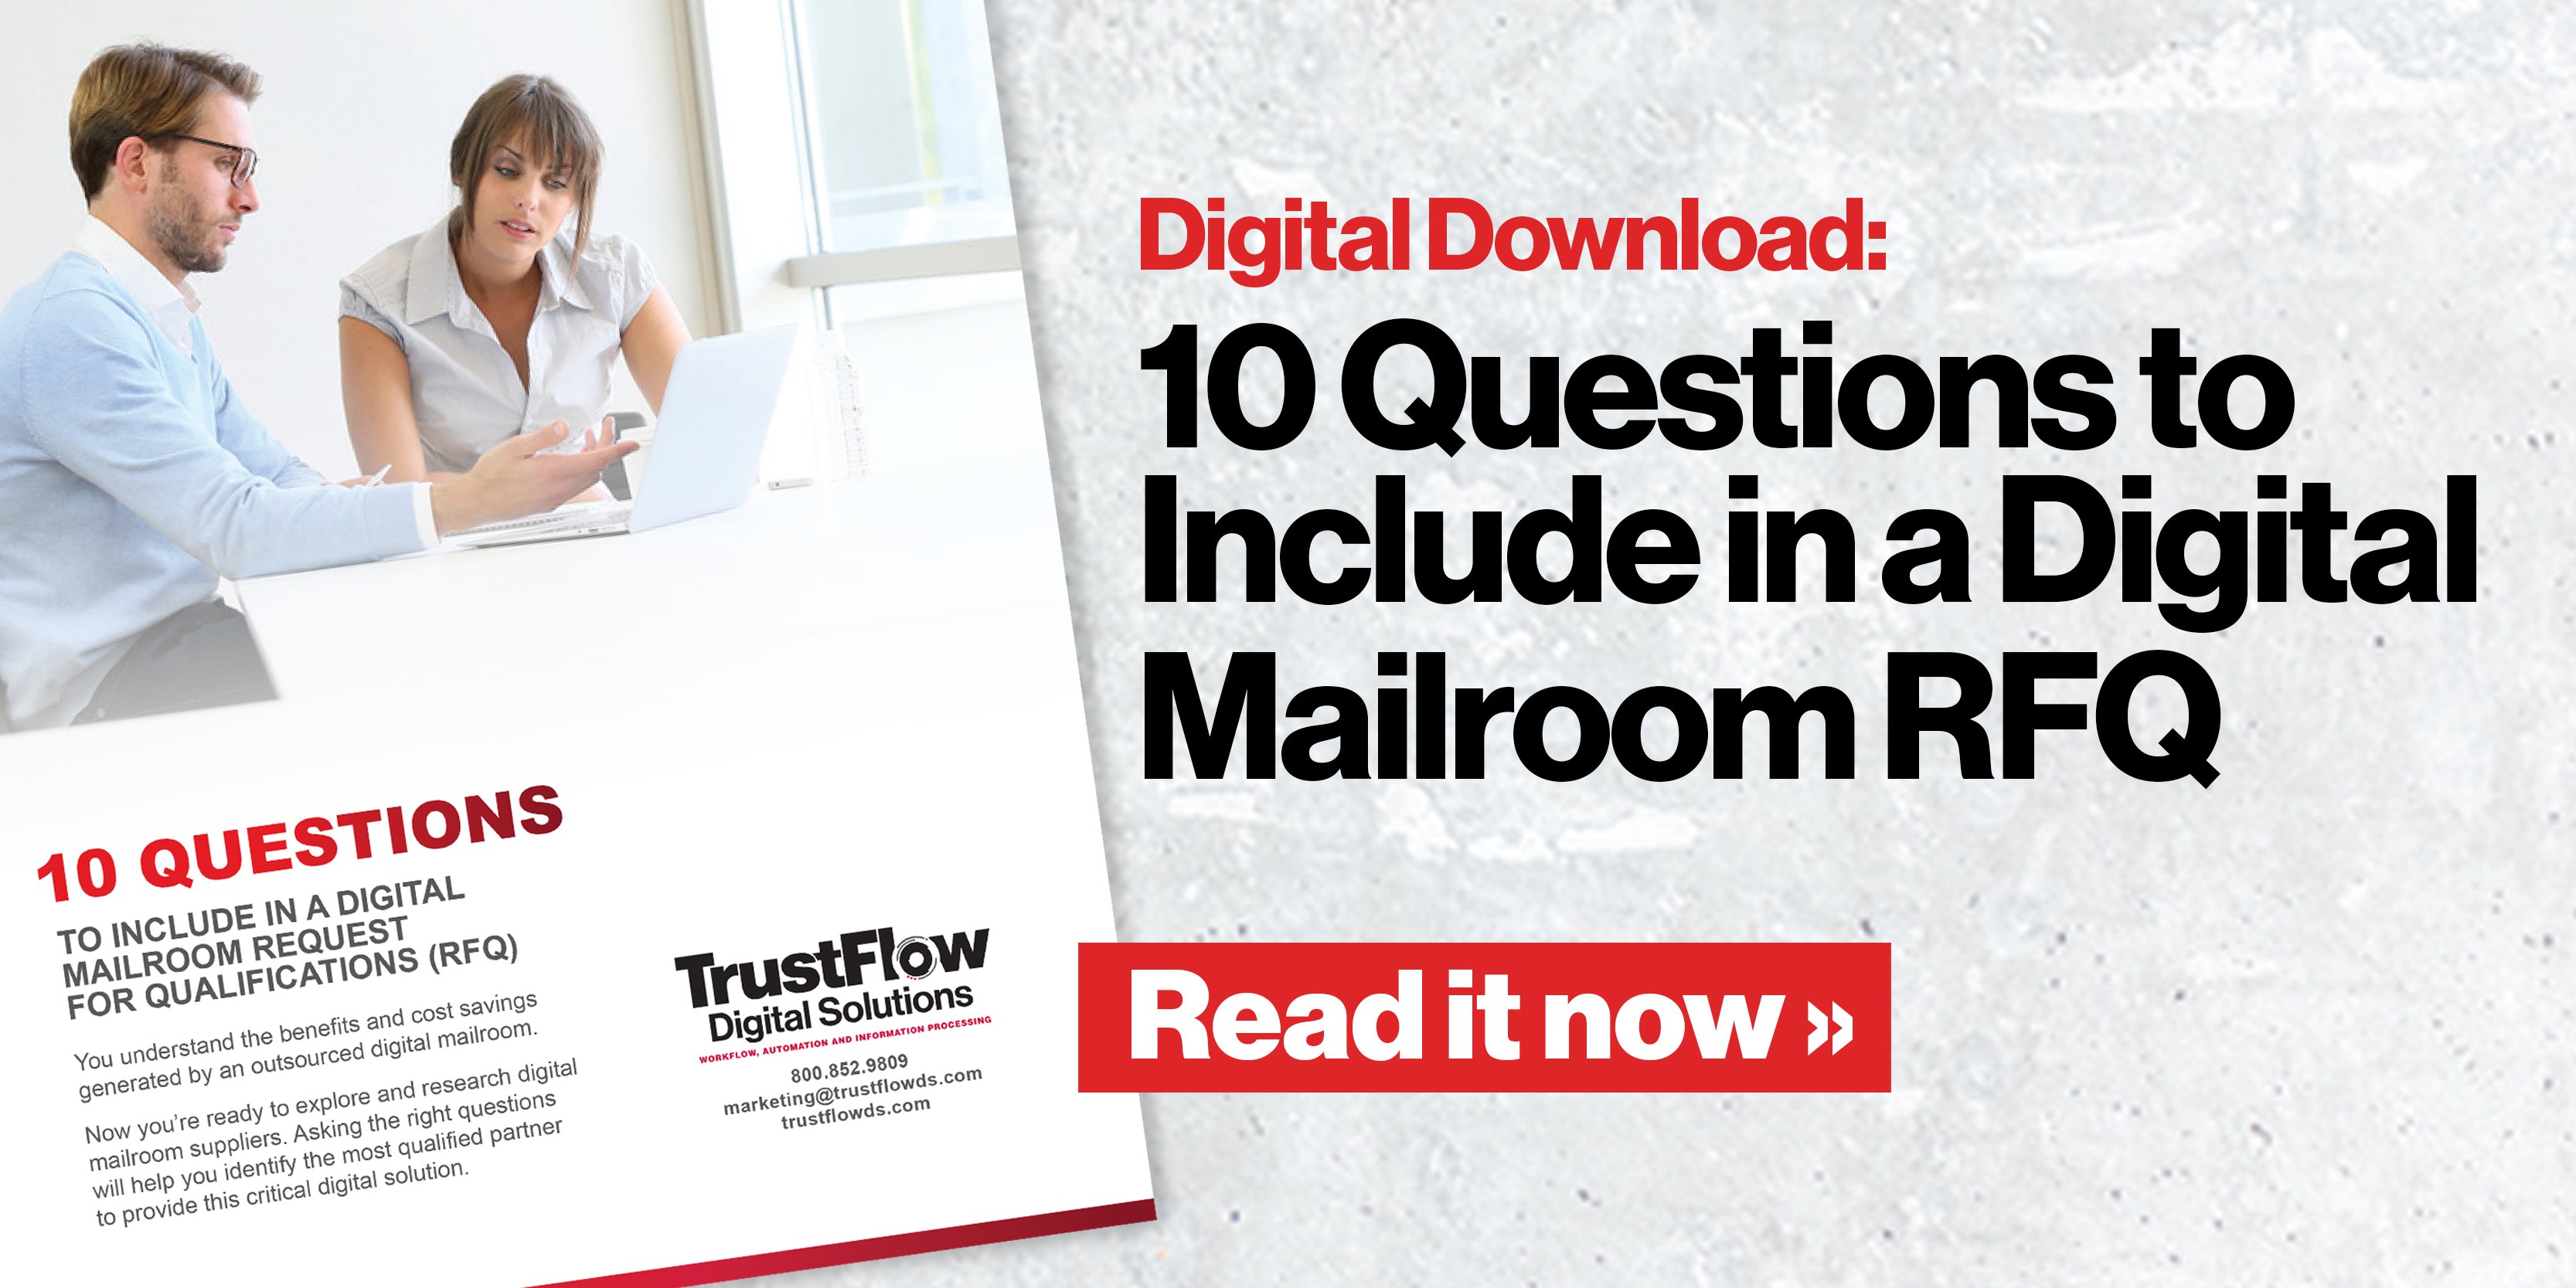 10 Questions to Include in a Digital Mailroom RFQ